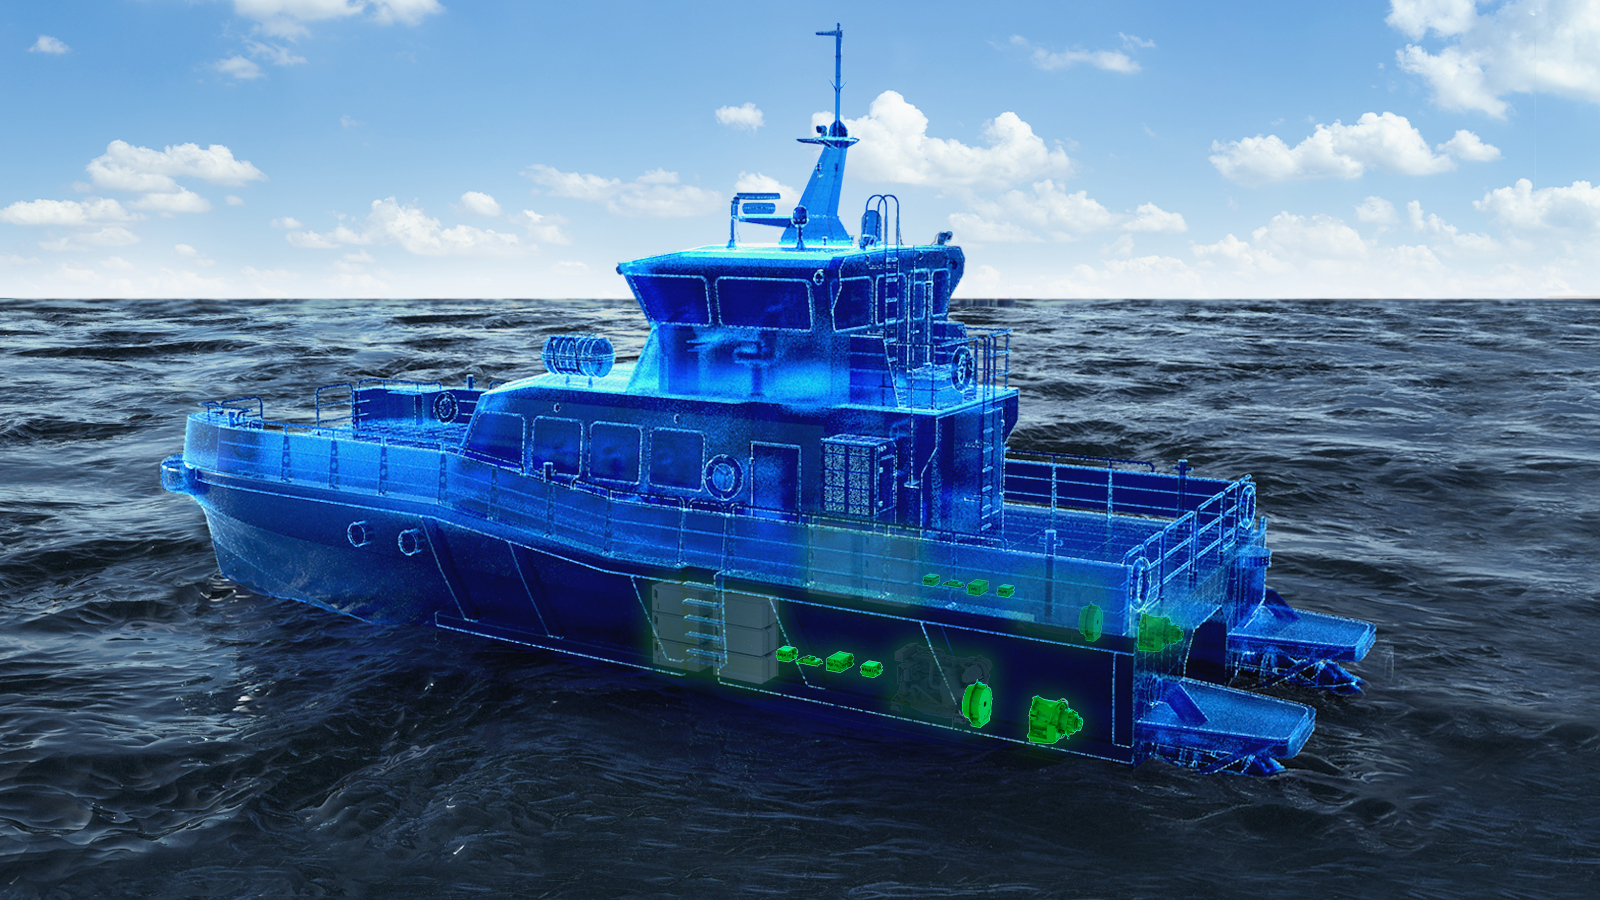 BAE Systems launches next-generation power and propulsion system to help marine operators reach zero emissions.